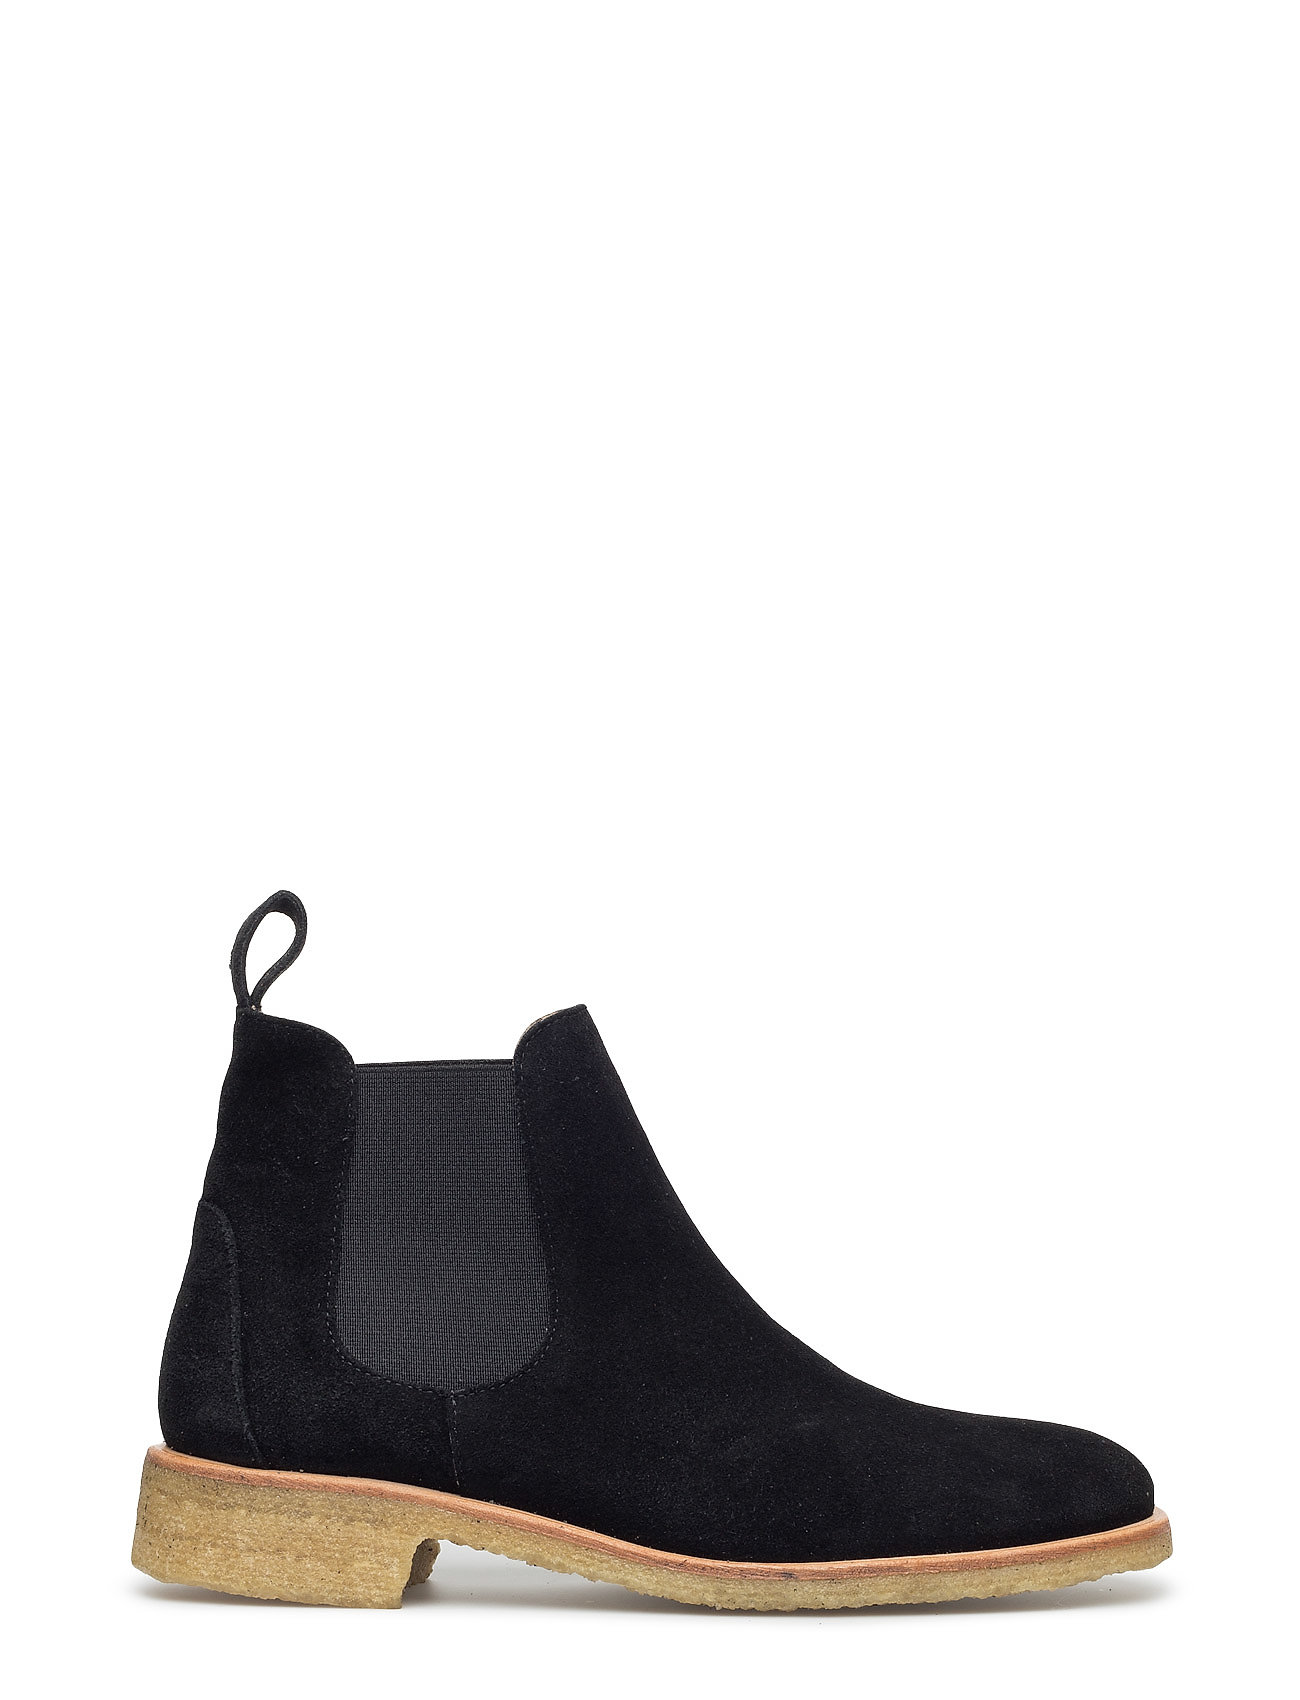 Chelsea Boot Shoes Chelsea Boots Musta ANGULUS